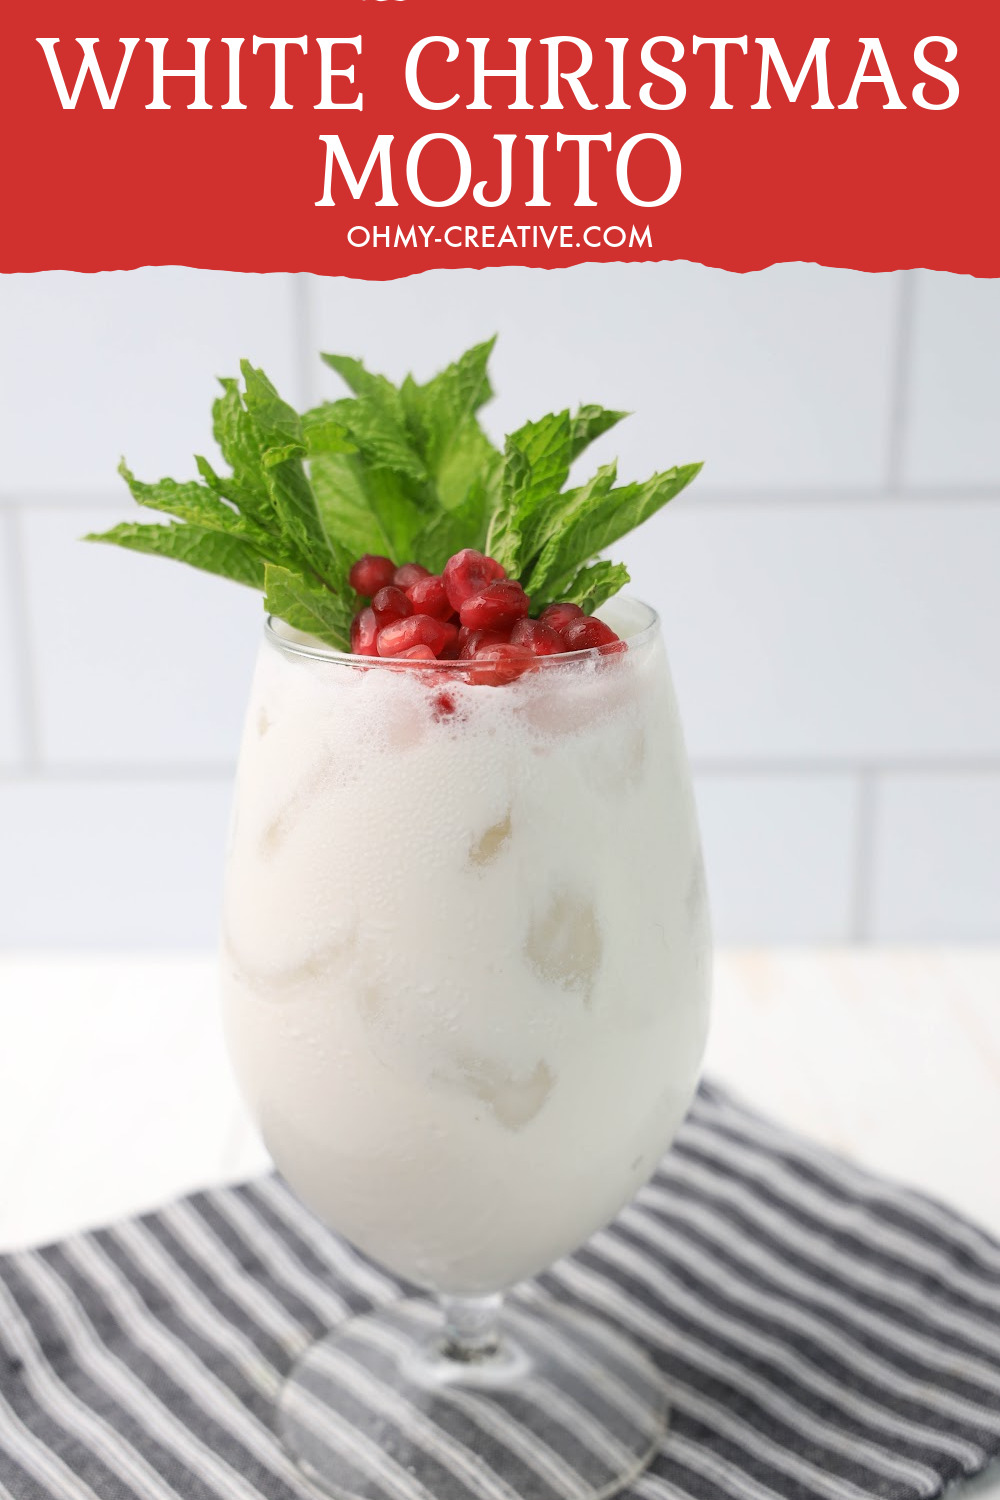 This pretty white Christmas mojito is topped with pomegranate arils and fresh mint. It sits on a black and white checked napkin on a white kitchen counter and backsplash.